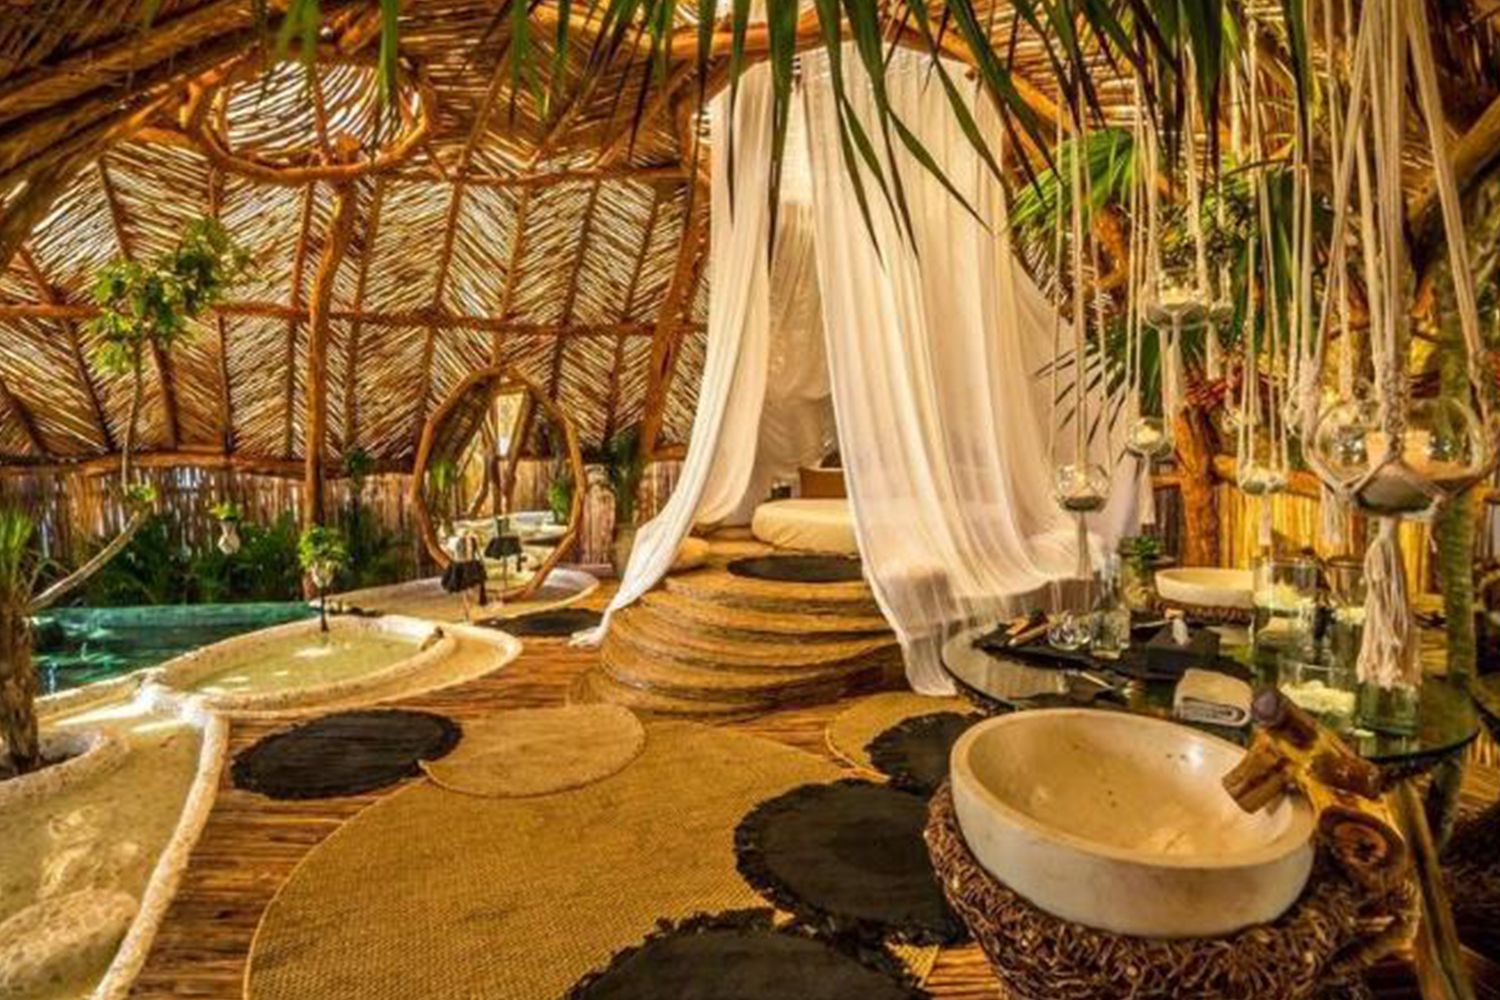 12 Most Unique Hotels in the World - Most Outrageous and Unusual